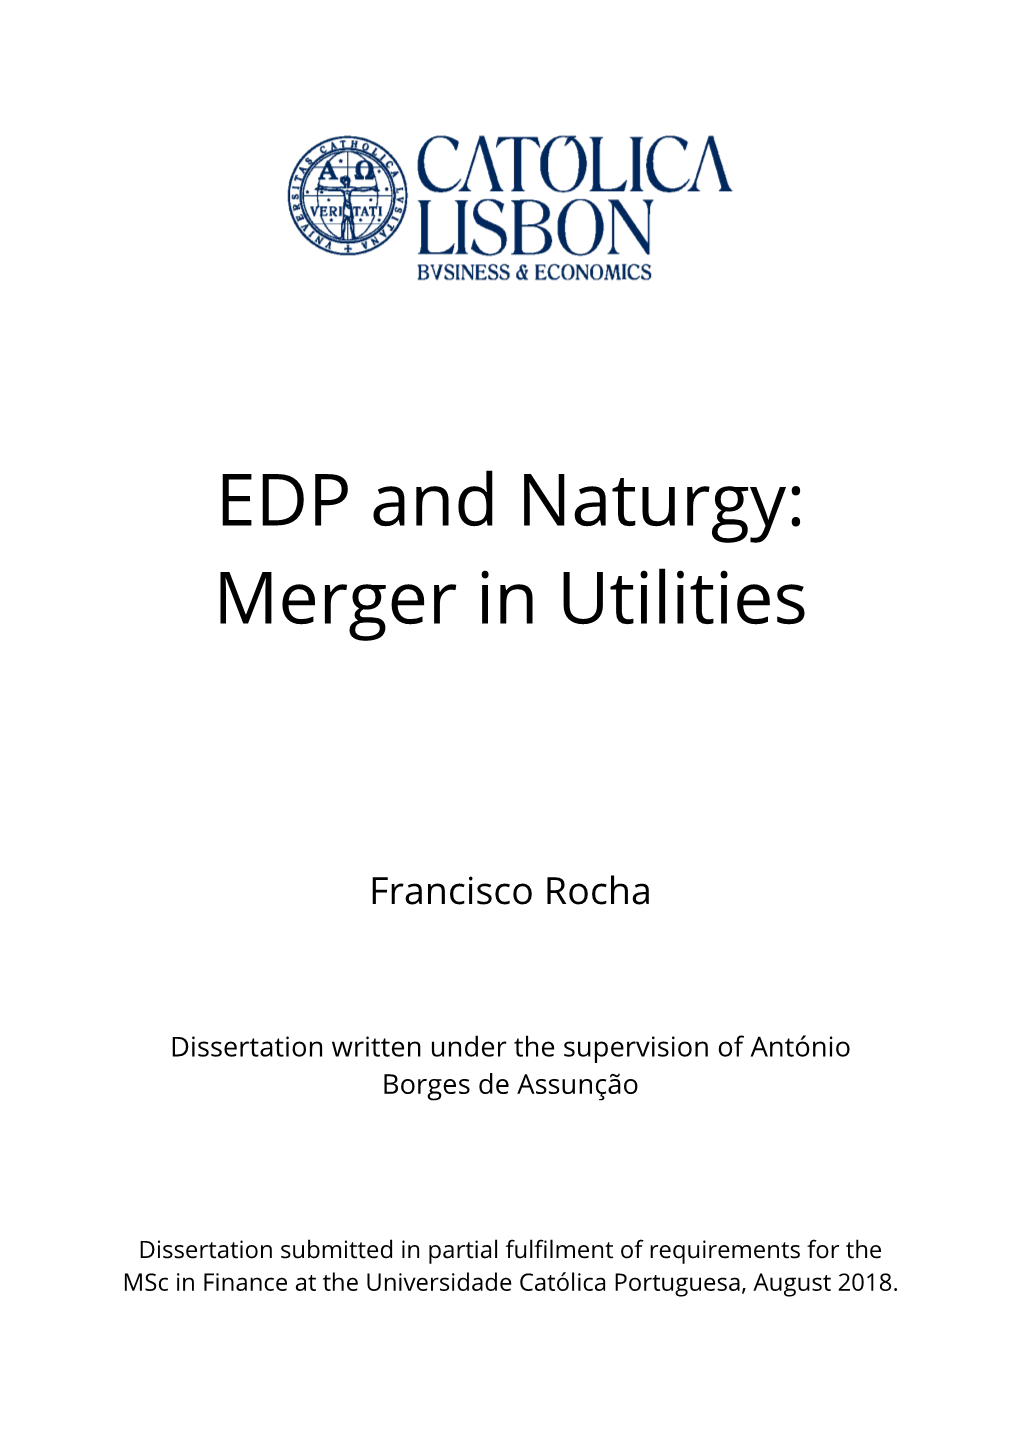 EDP and Naturgy: Merger in Utilities